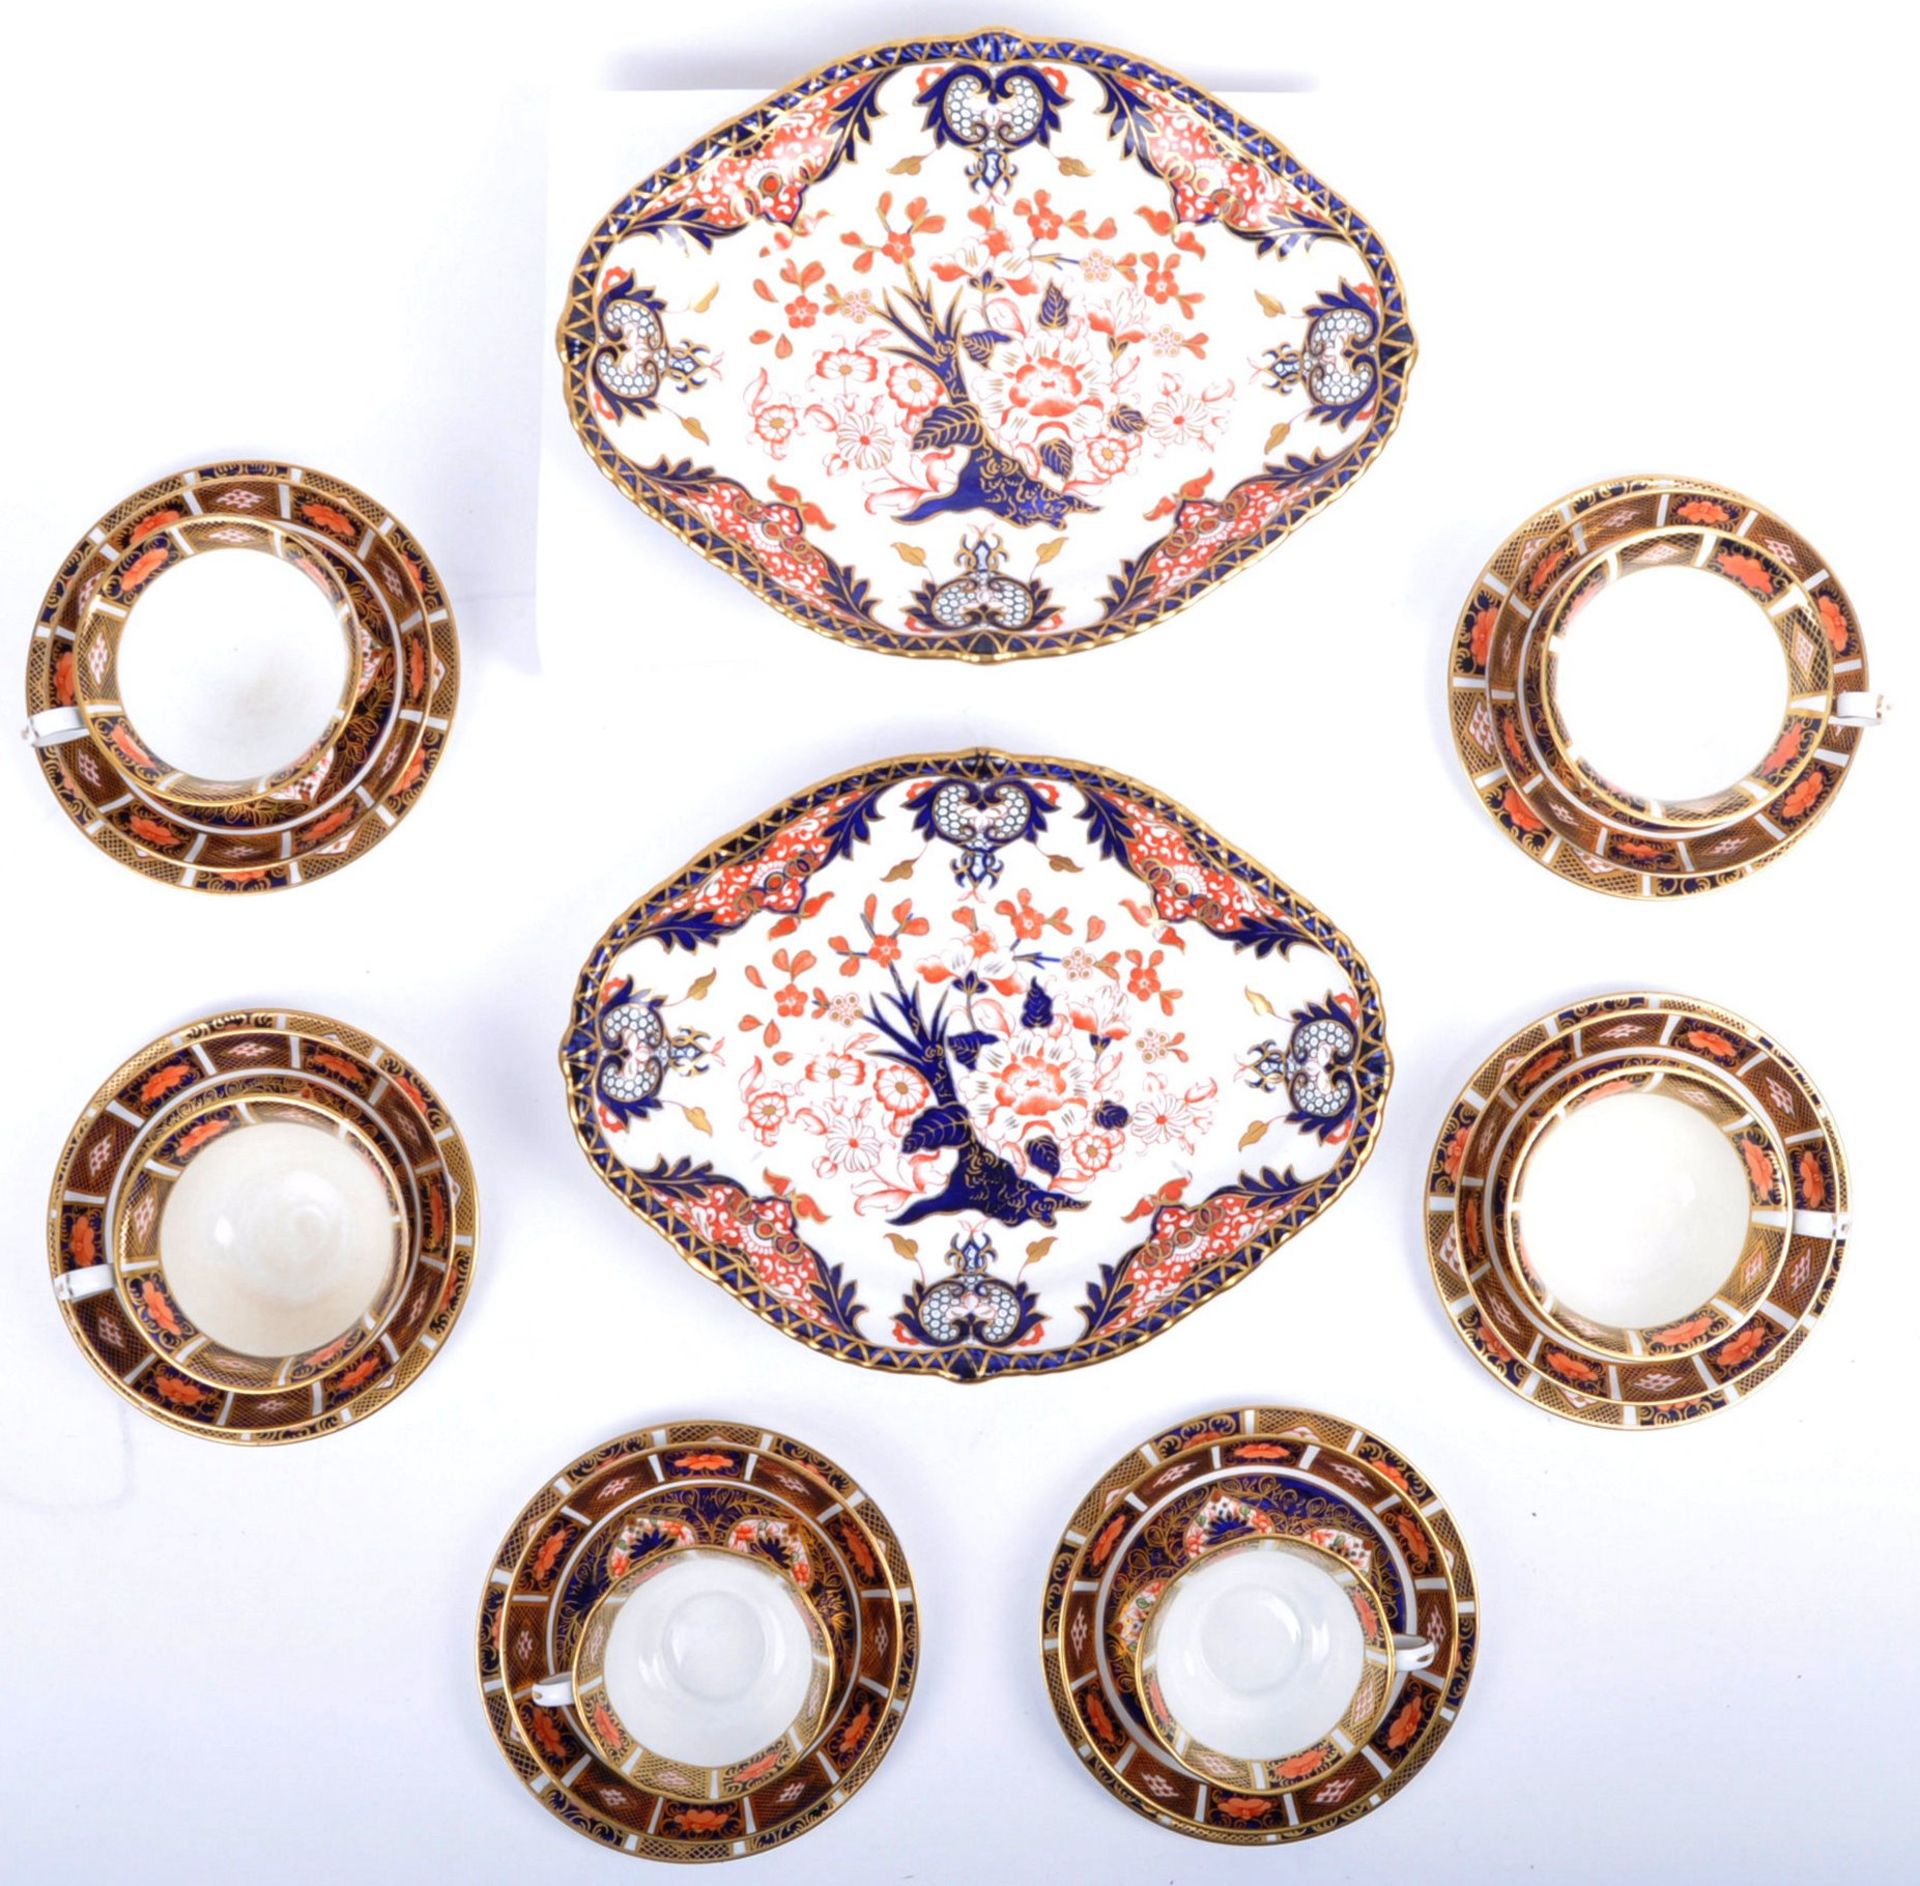 ROYAL CROWN DERBY SET OF 6 TRIOS & 2 SERVING DISHES - Image 2 of 5